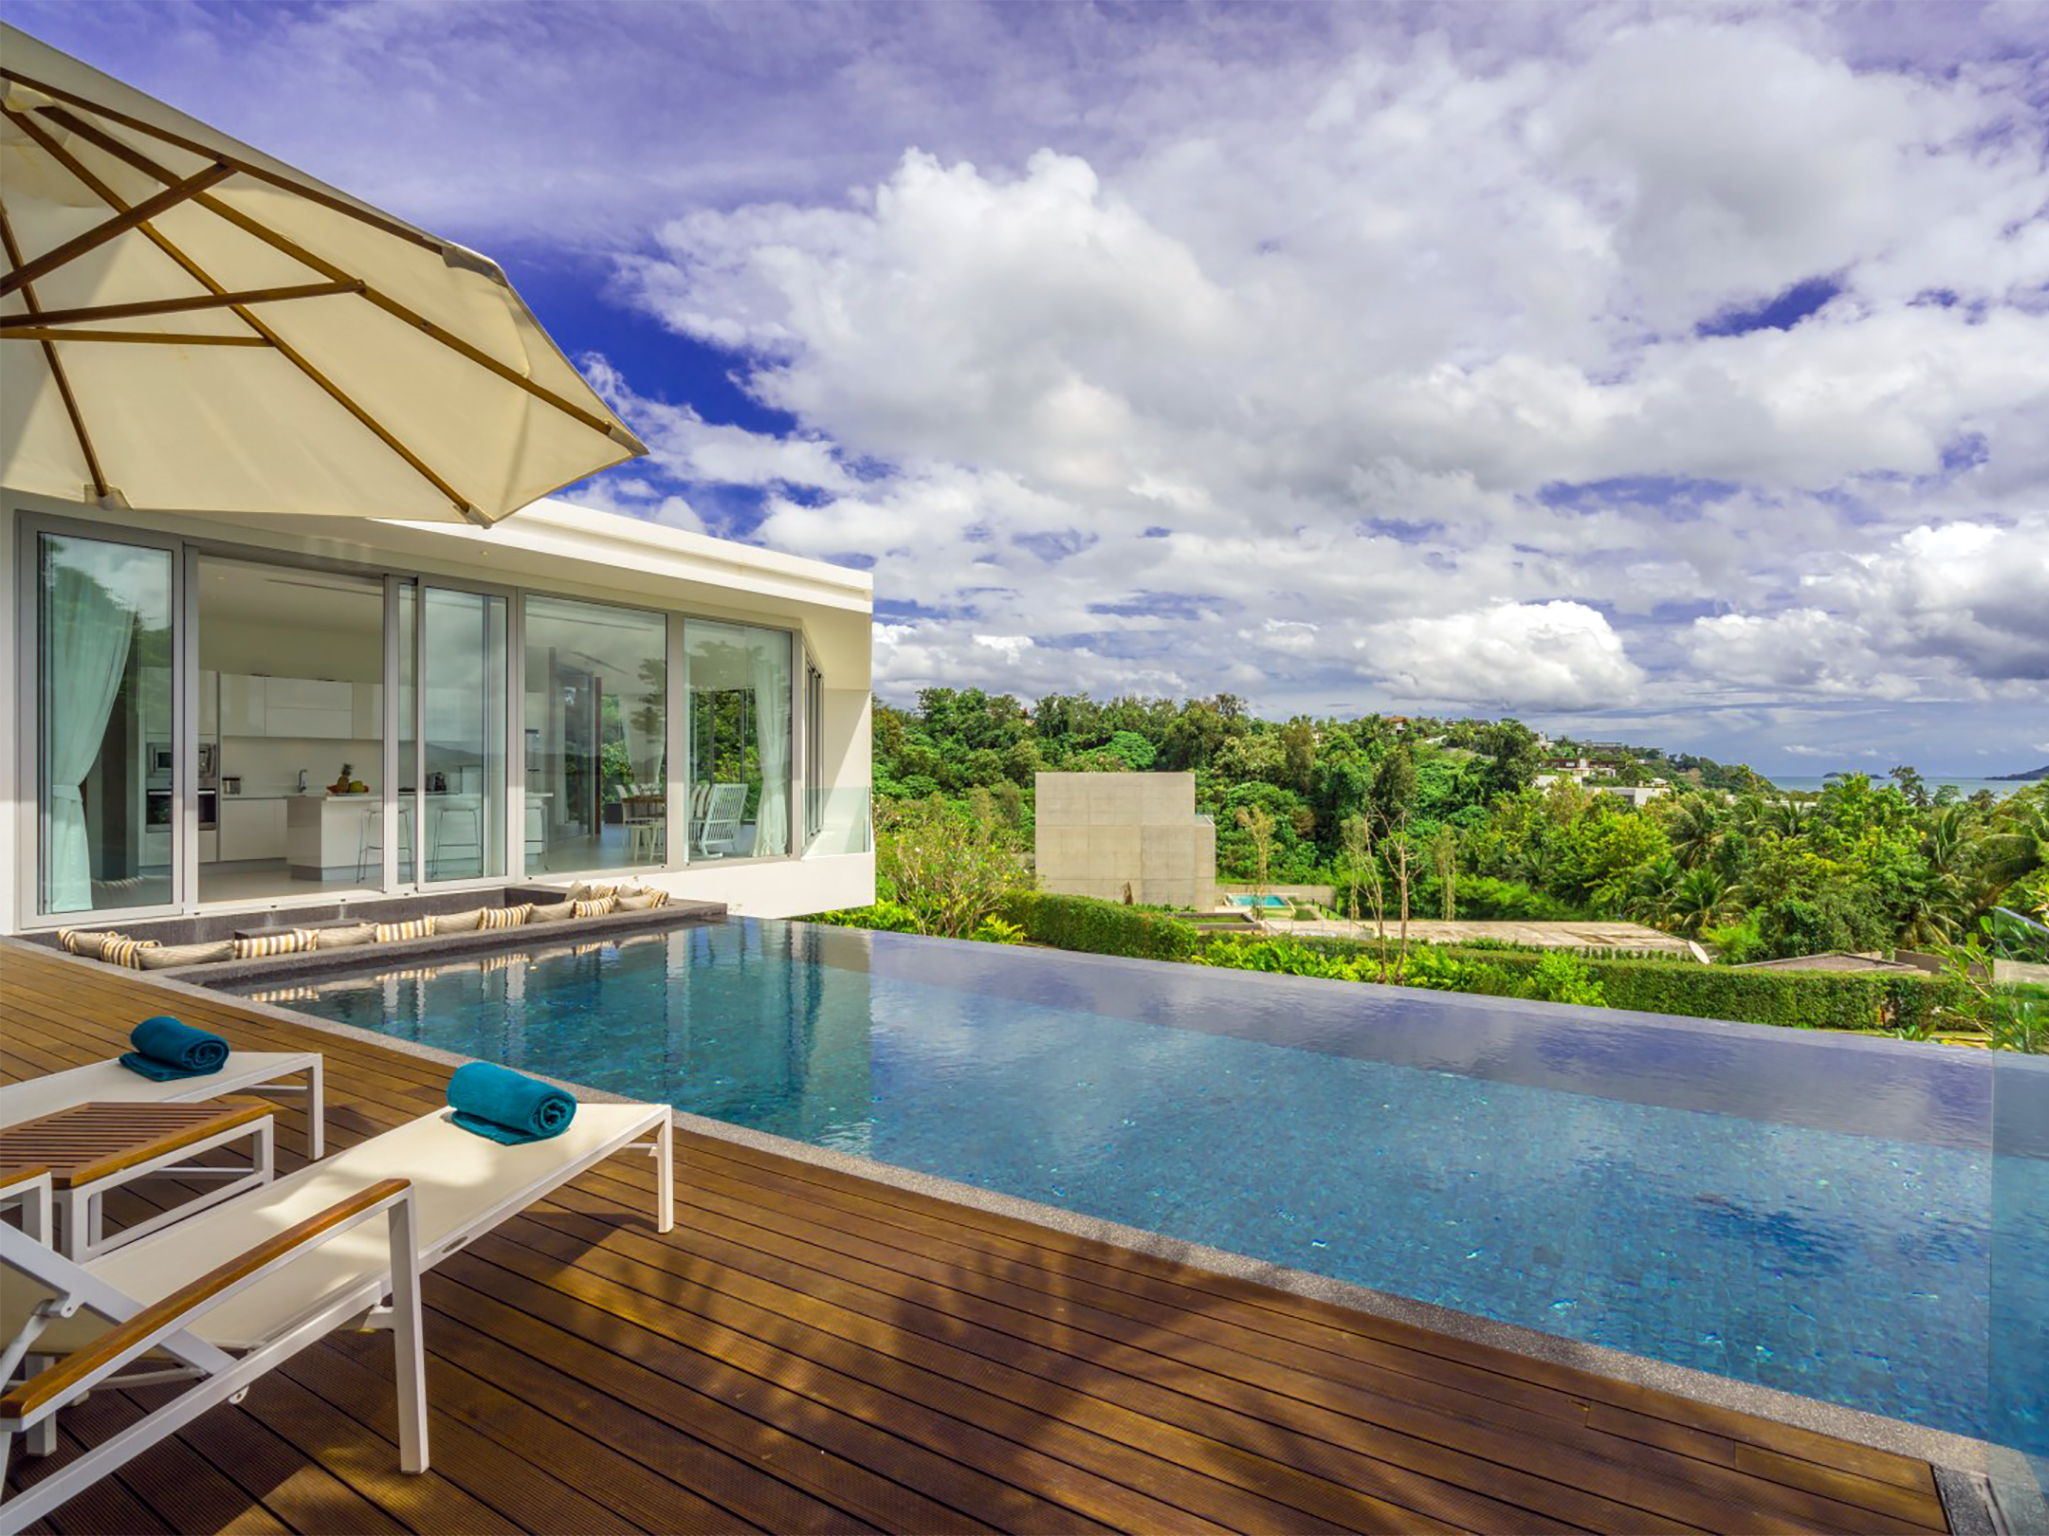 Villa Abiente - Stunning view from the pool